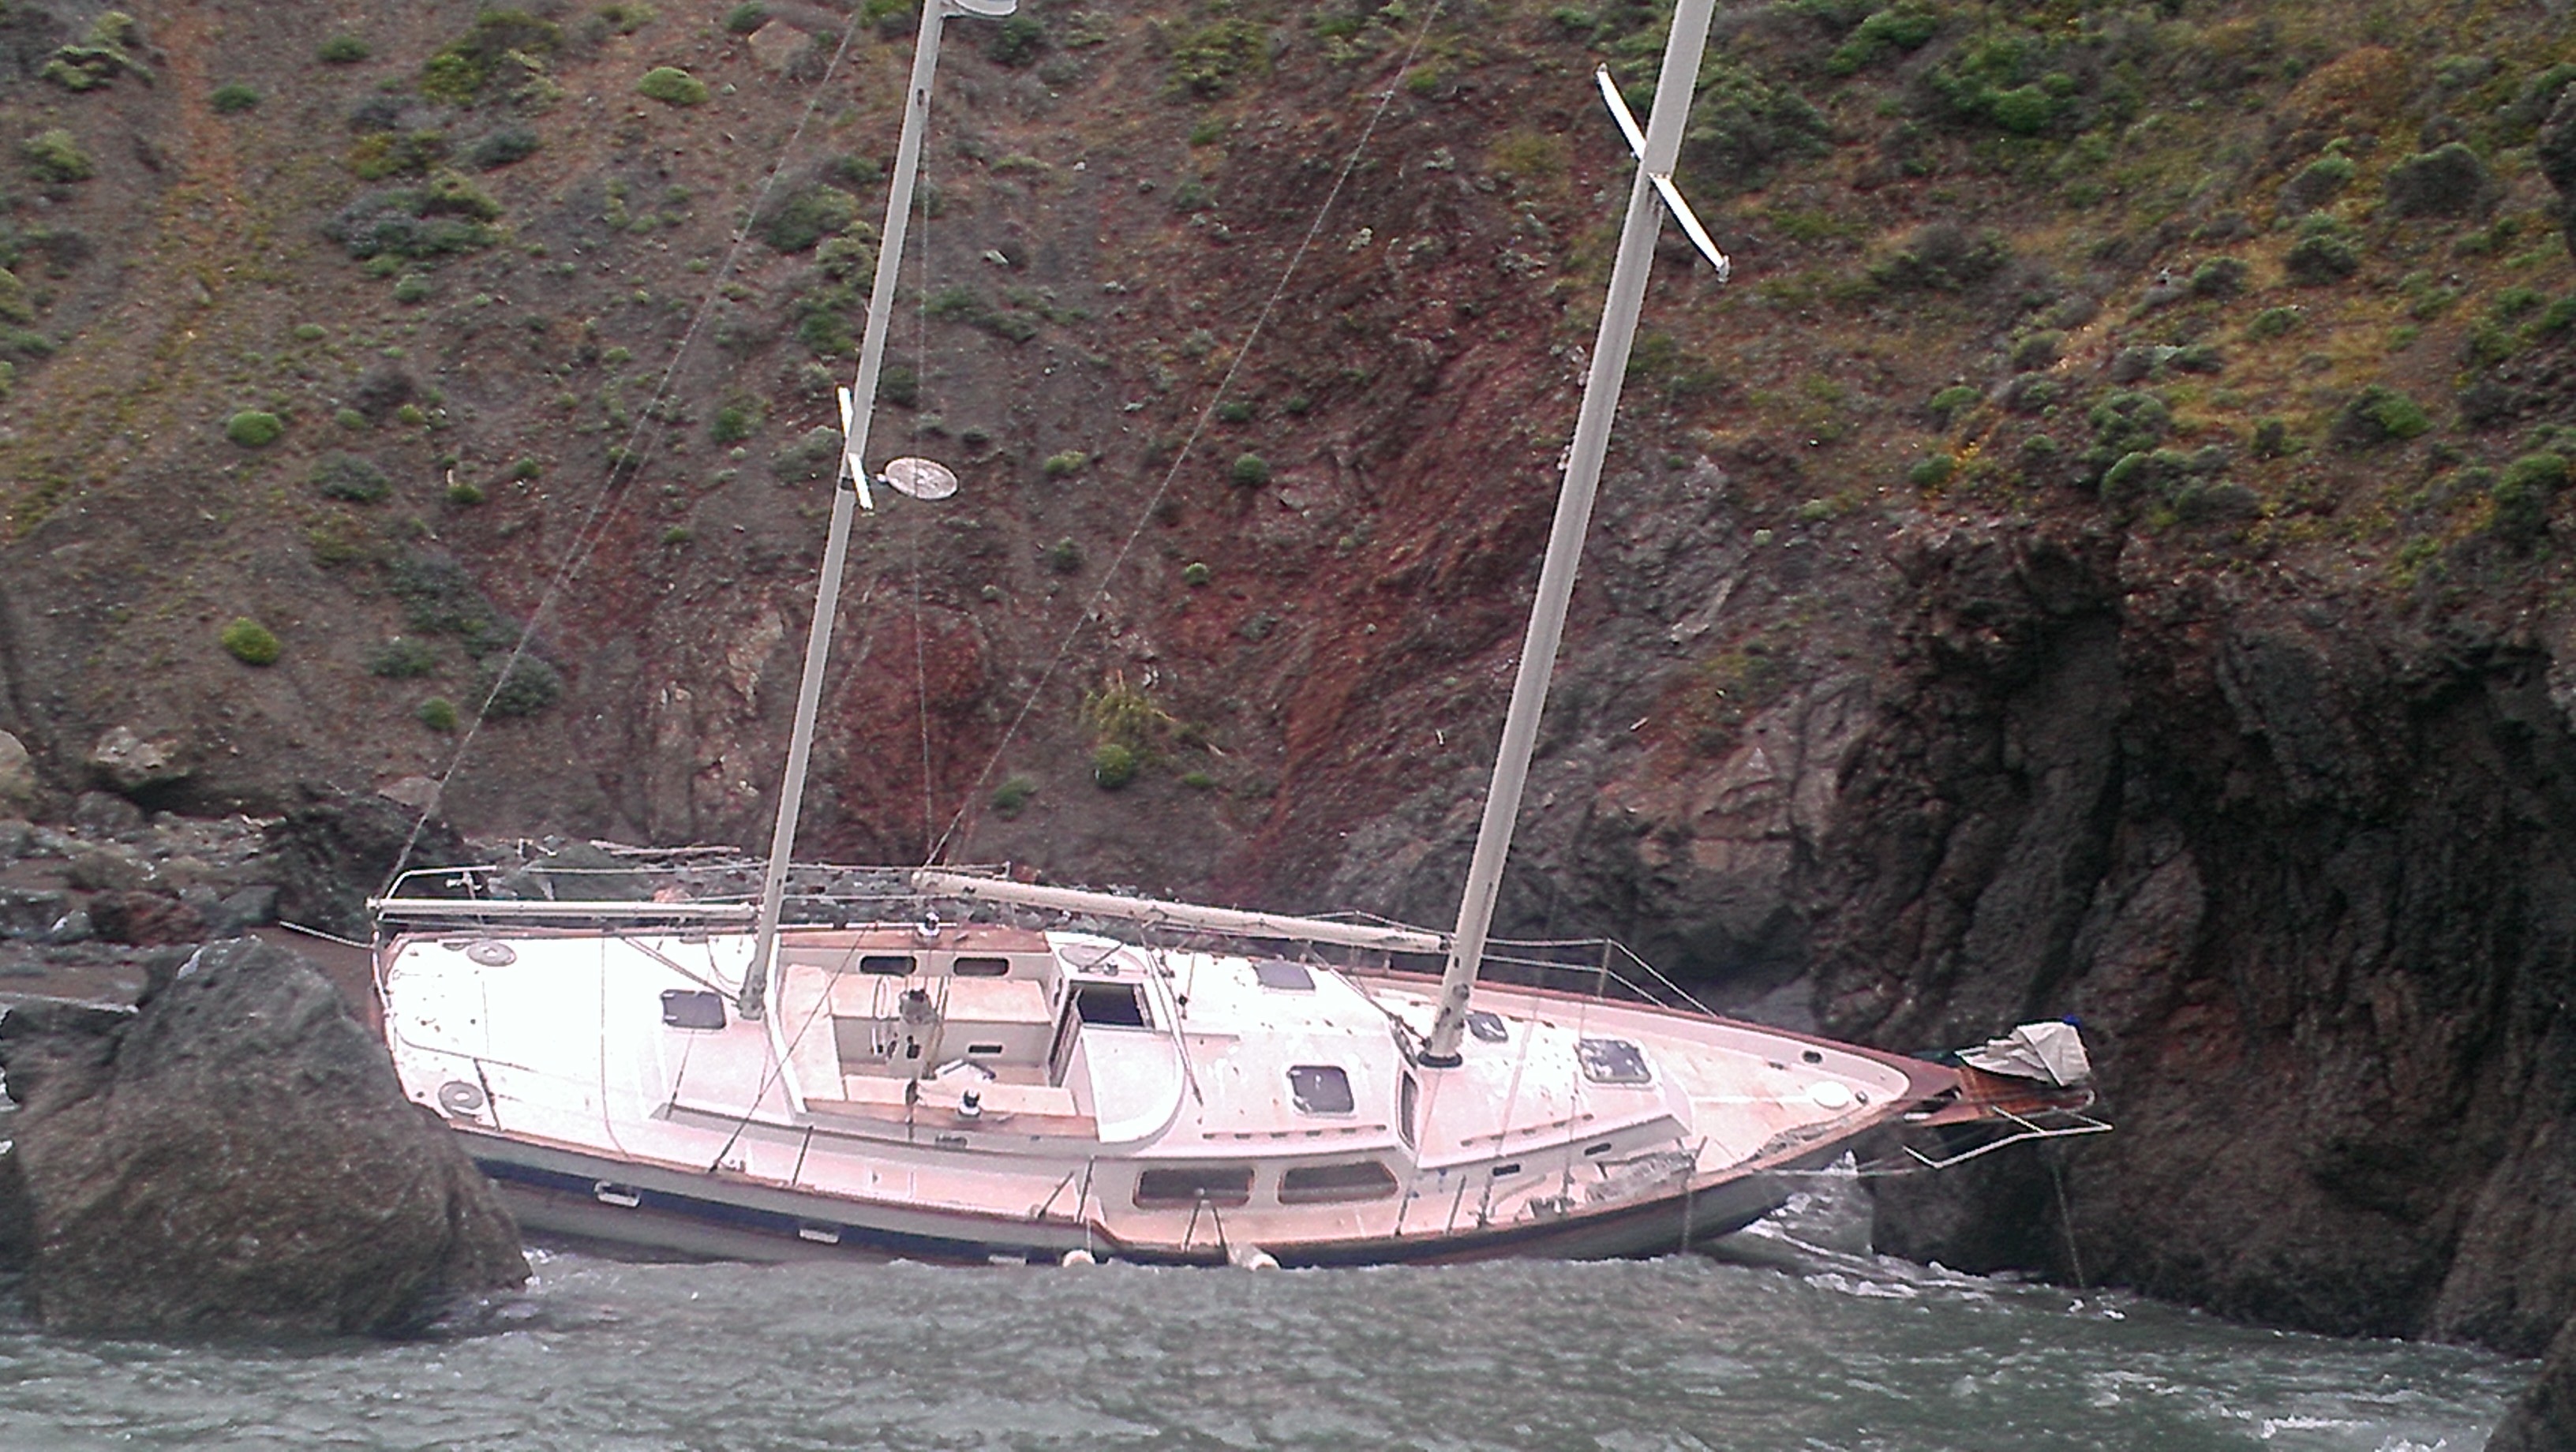 Ths vessel was salvaged off of Point Diablo.